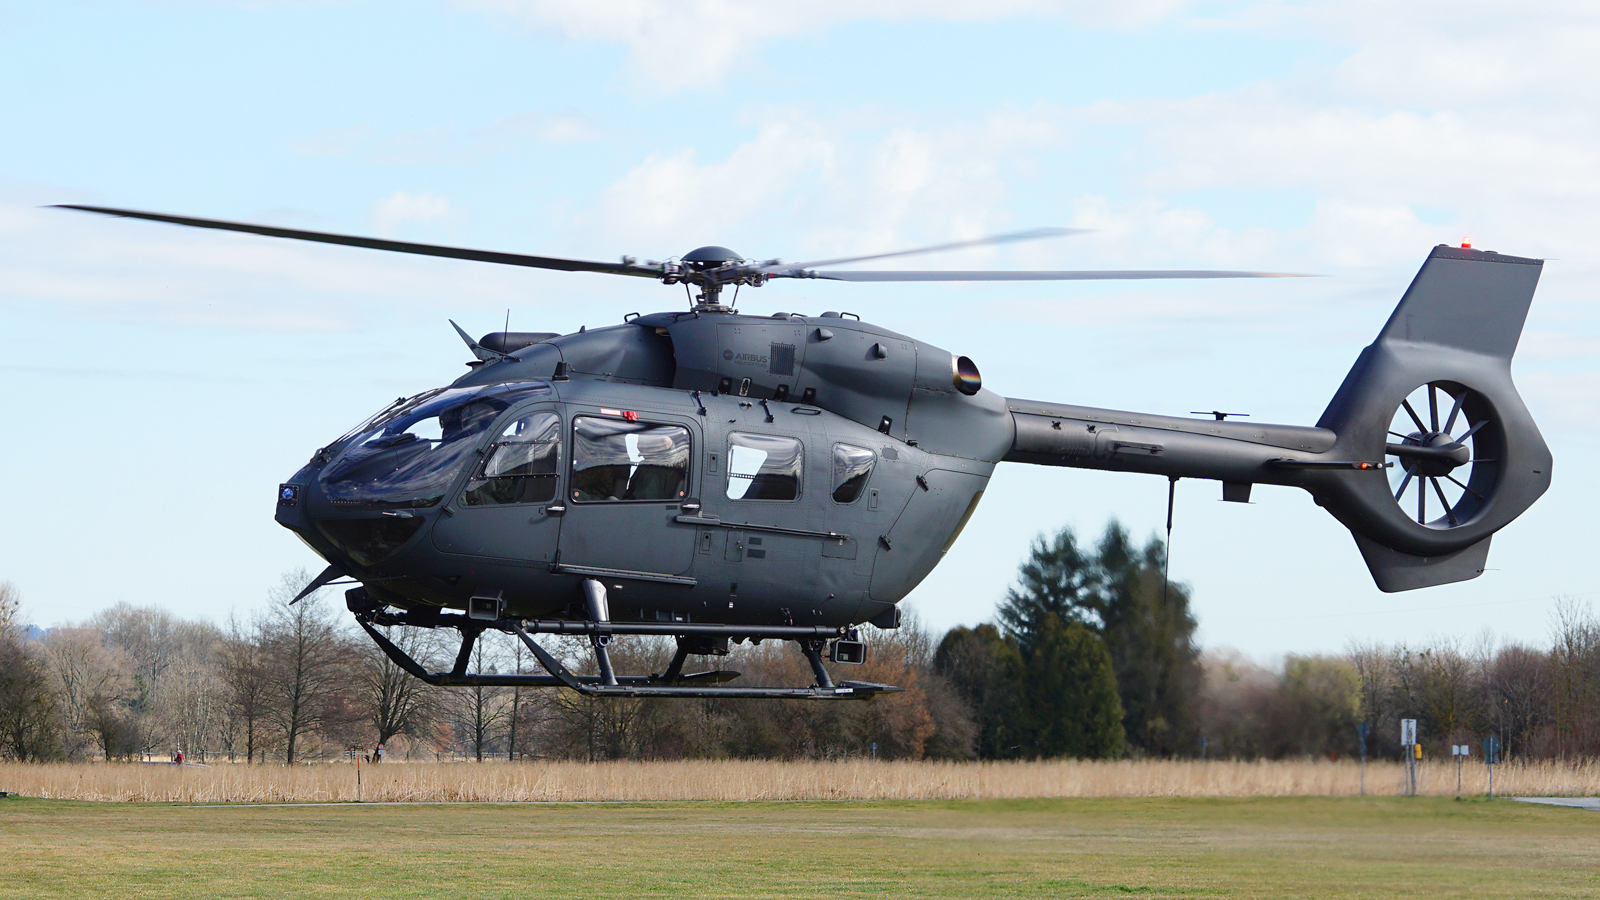 IDAG was selected to support Hungarian’s H145M